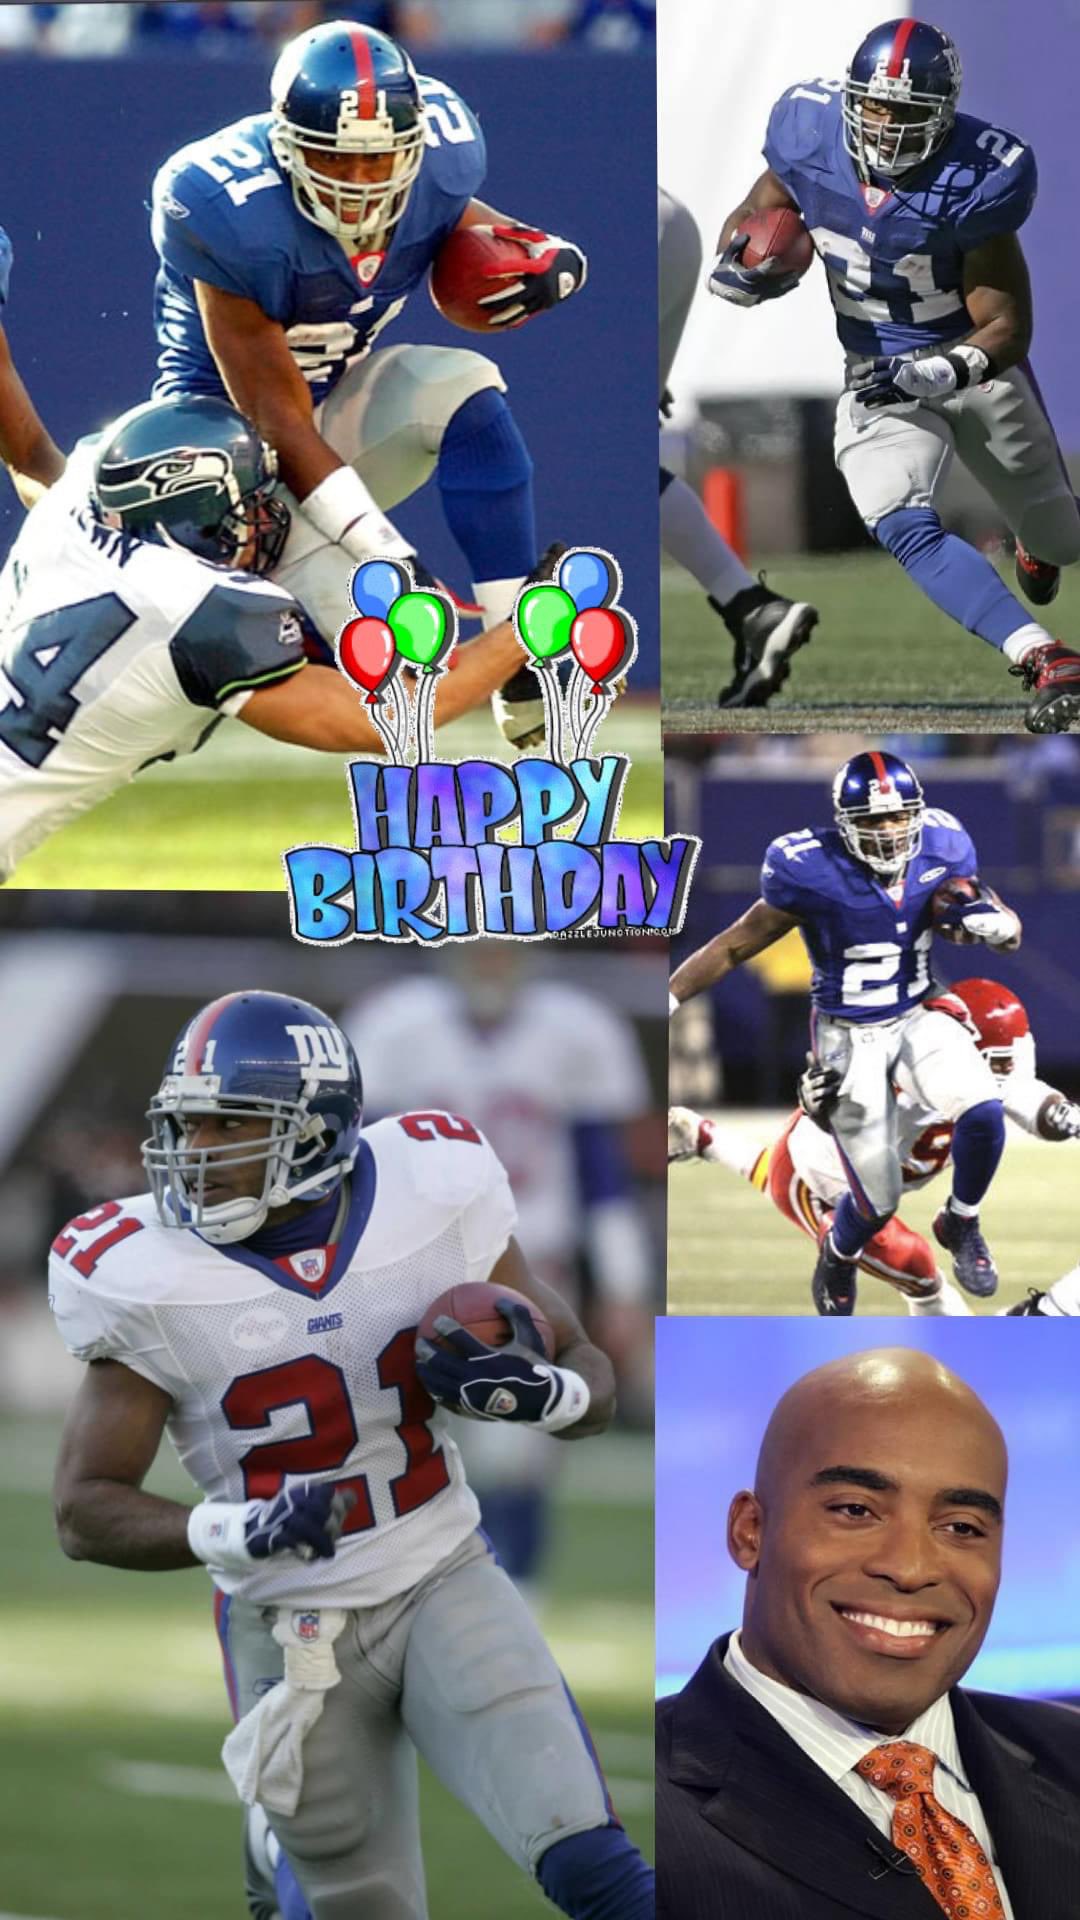 Happy Birthday to the great Tiki Barber!!! hope you enjoy your day bro!! 